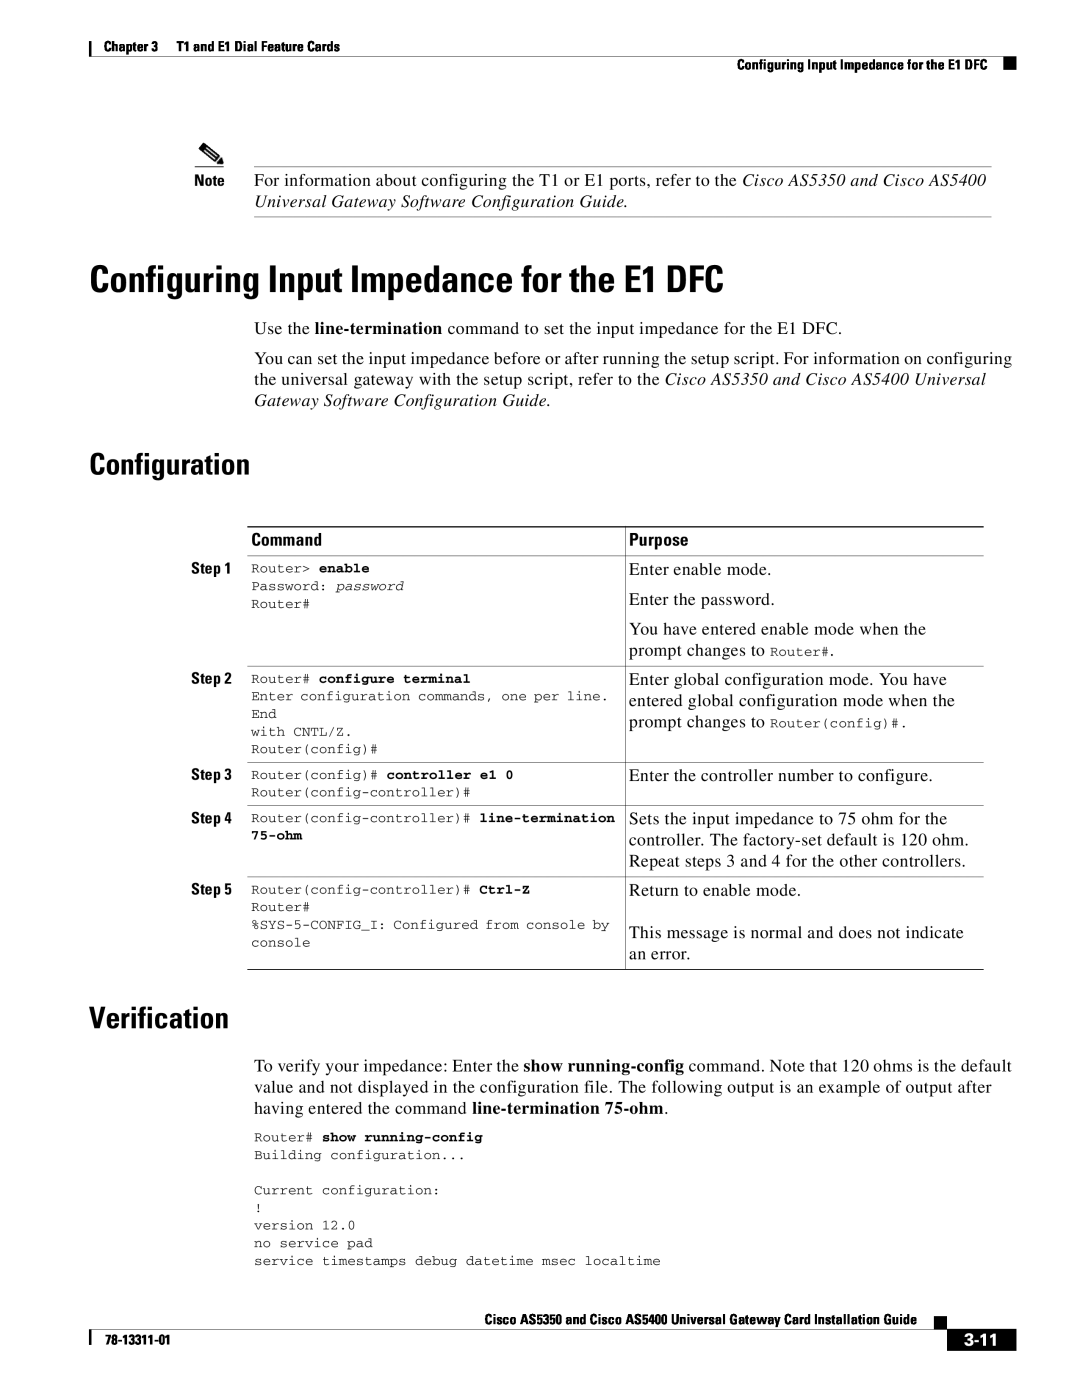 Cisco Systems AS5350 manual Configuring Input Impedance for the E1 DFC, Configuration, Verification, Command, Purpose, 3-11 